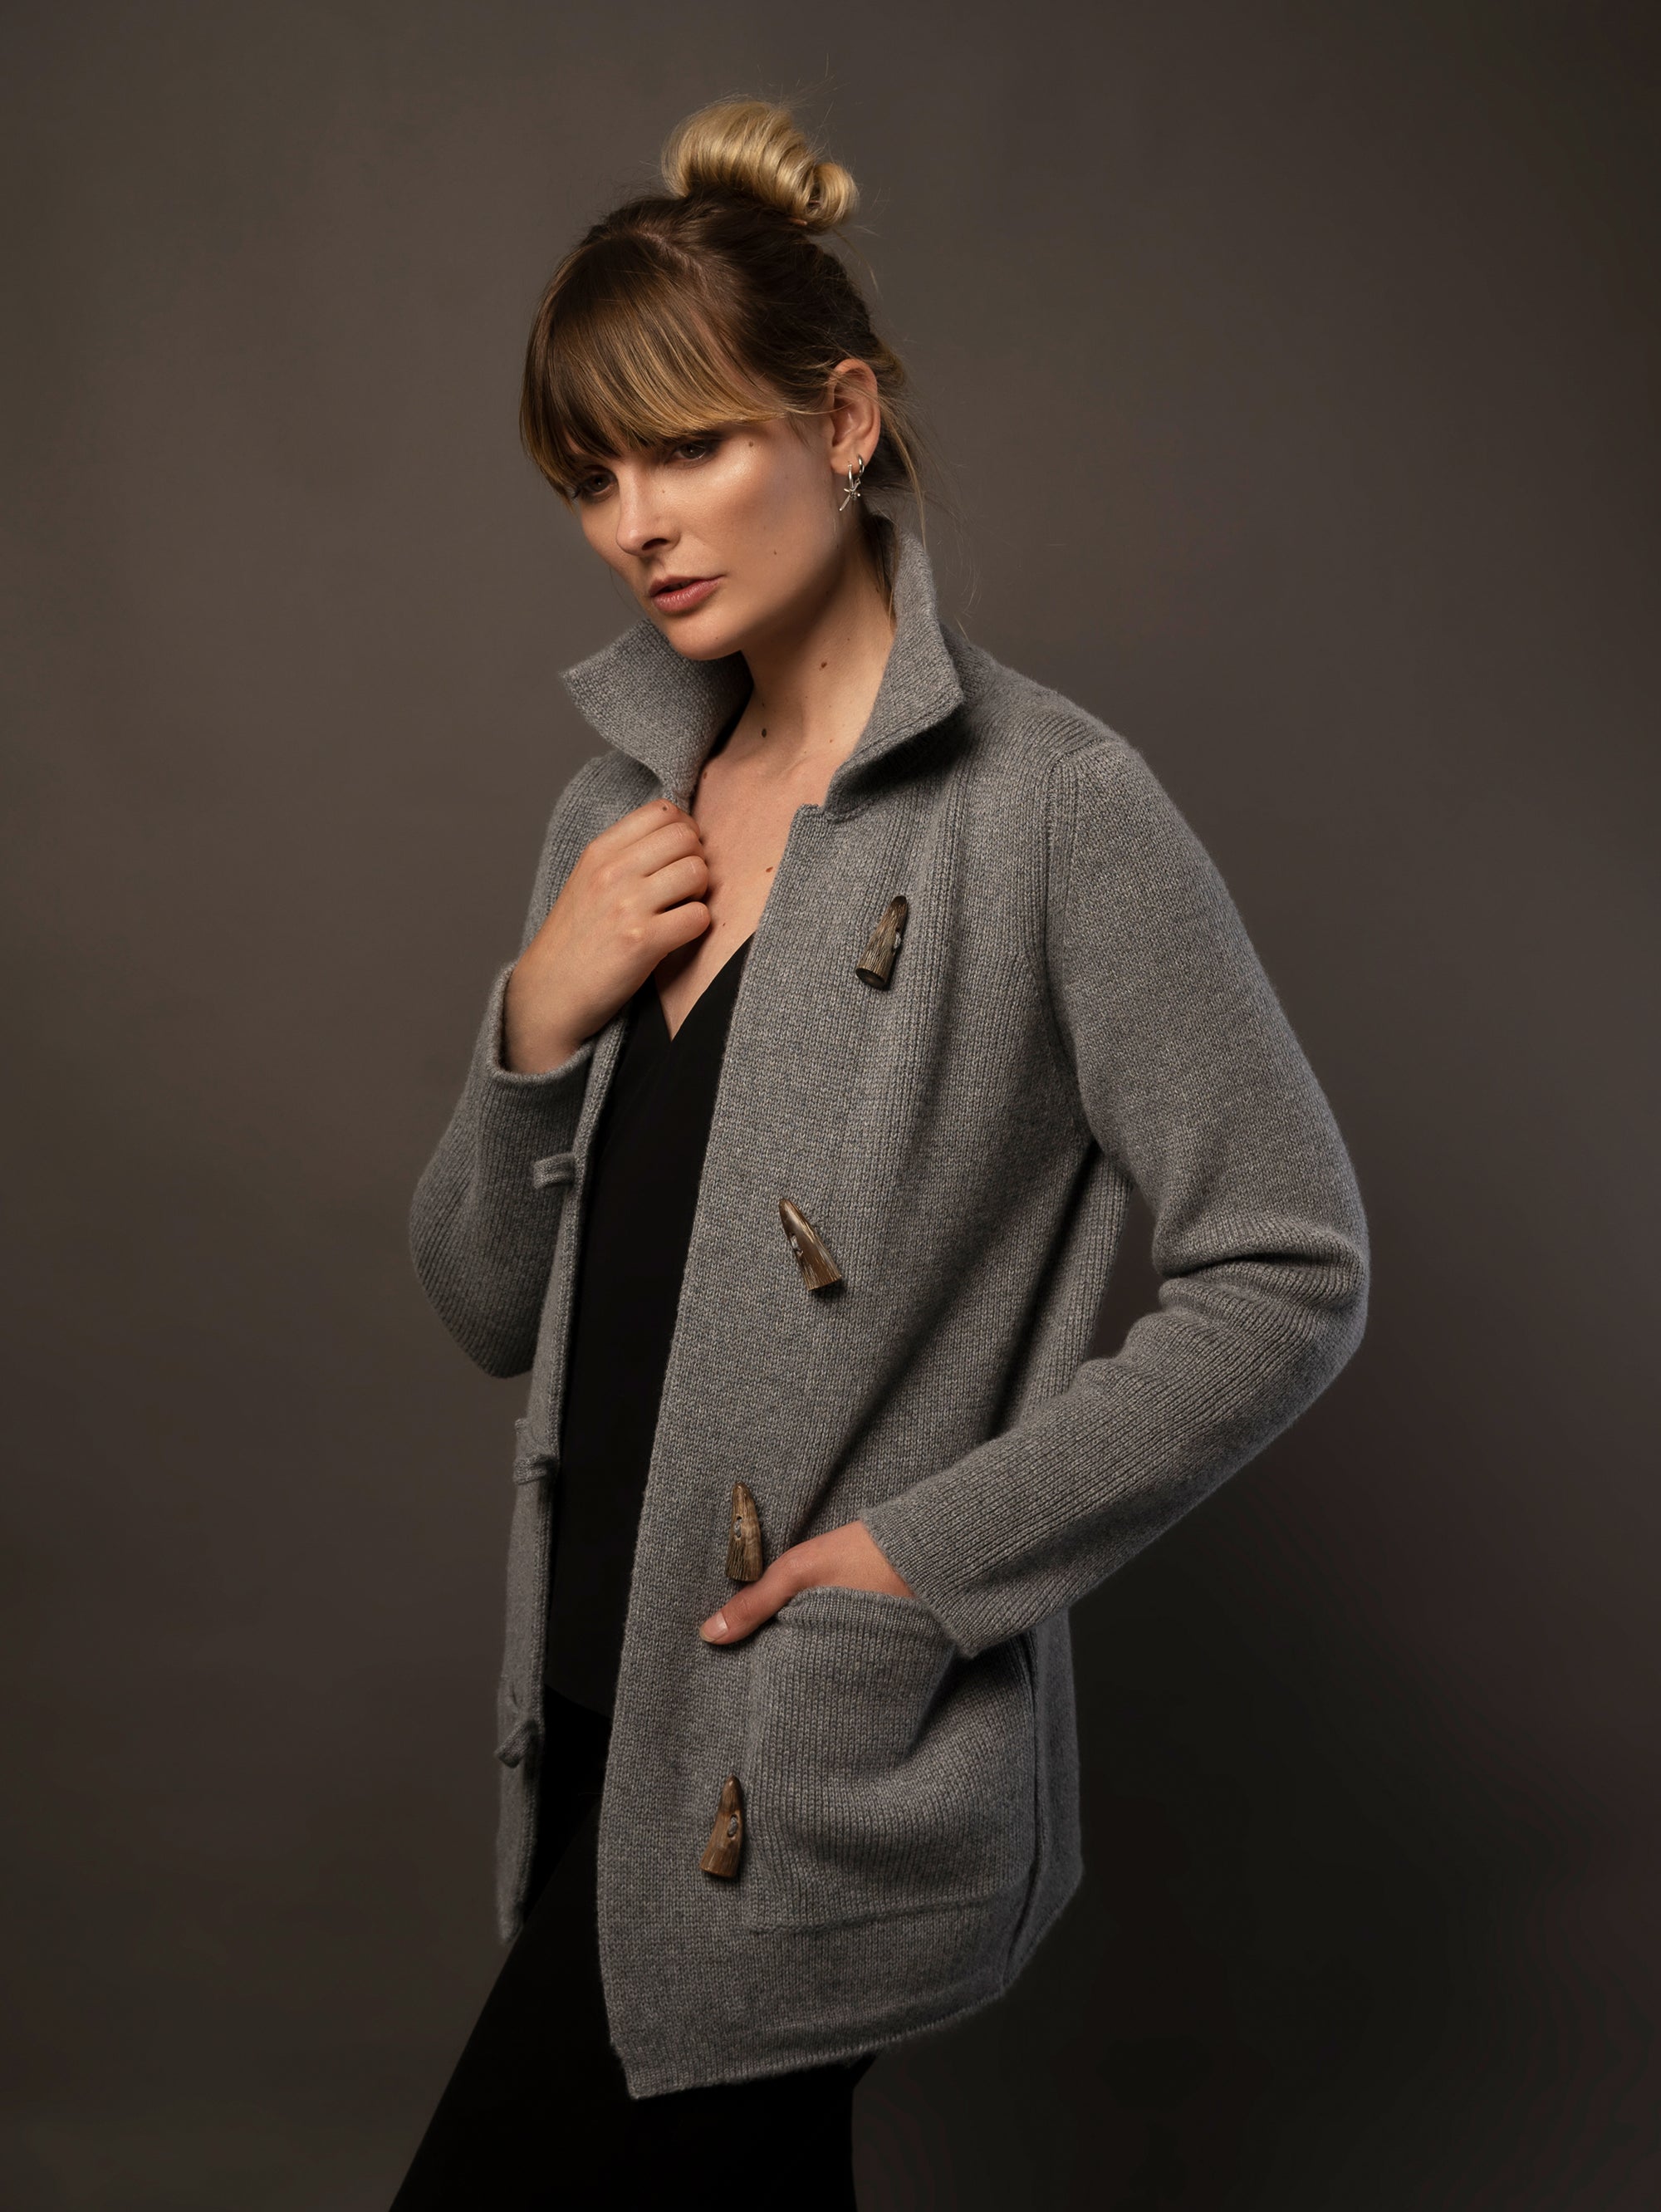 Ladies Cashmere Duffle Coat in Dark Grey. 100% cashmere handmade under the Royal Warrant in the UK. This is Cashmere at it's finest. 